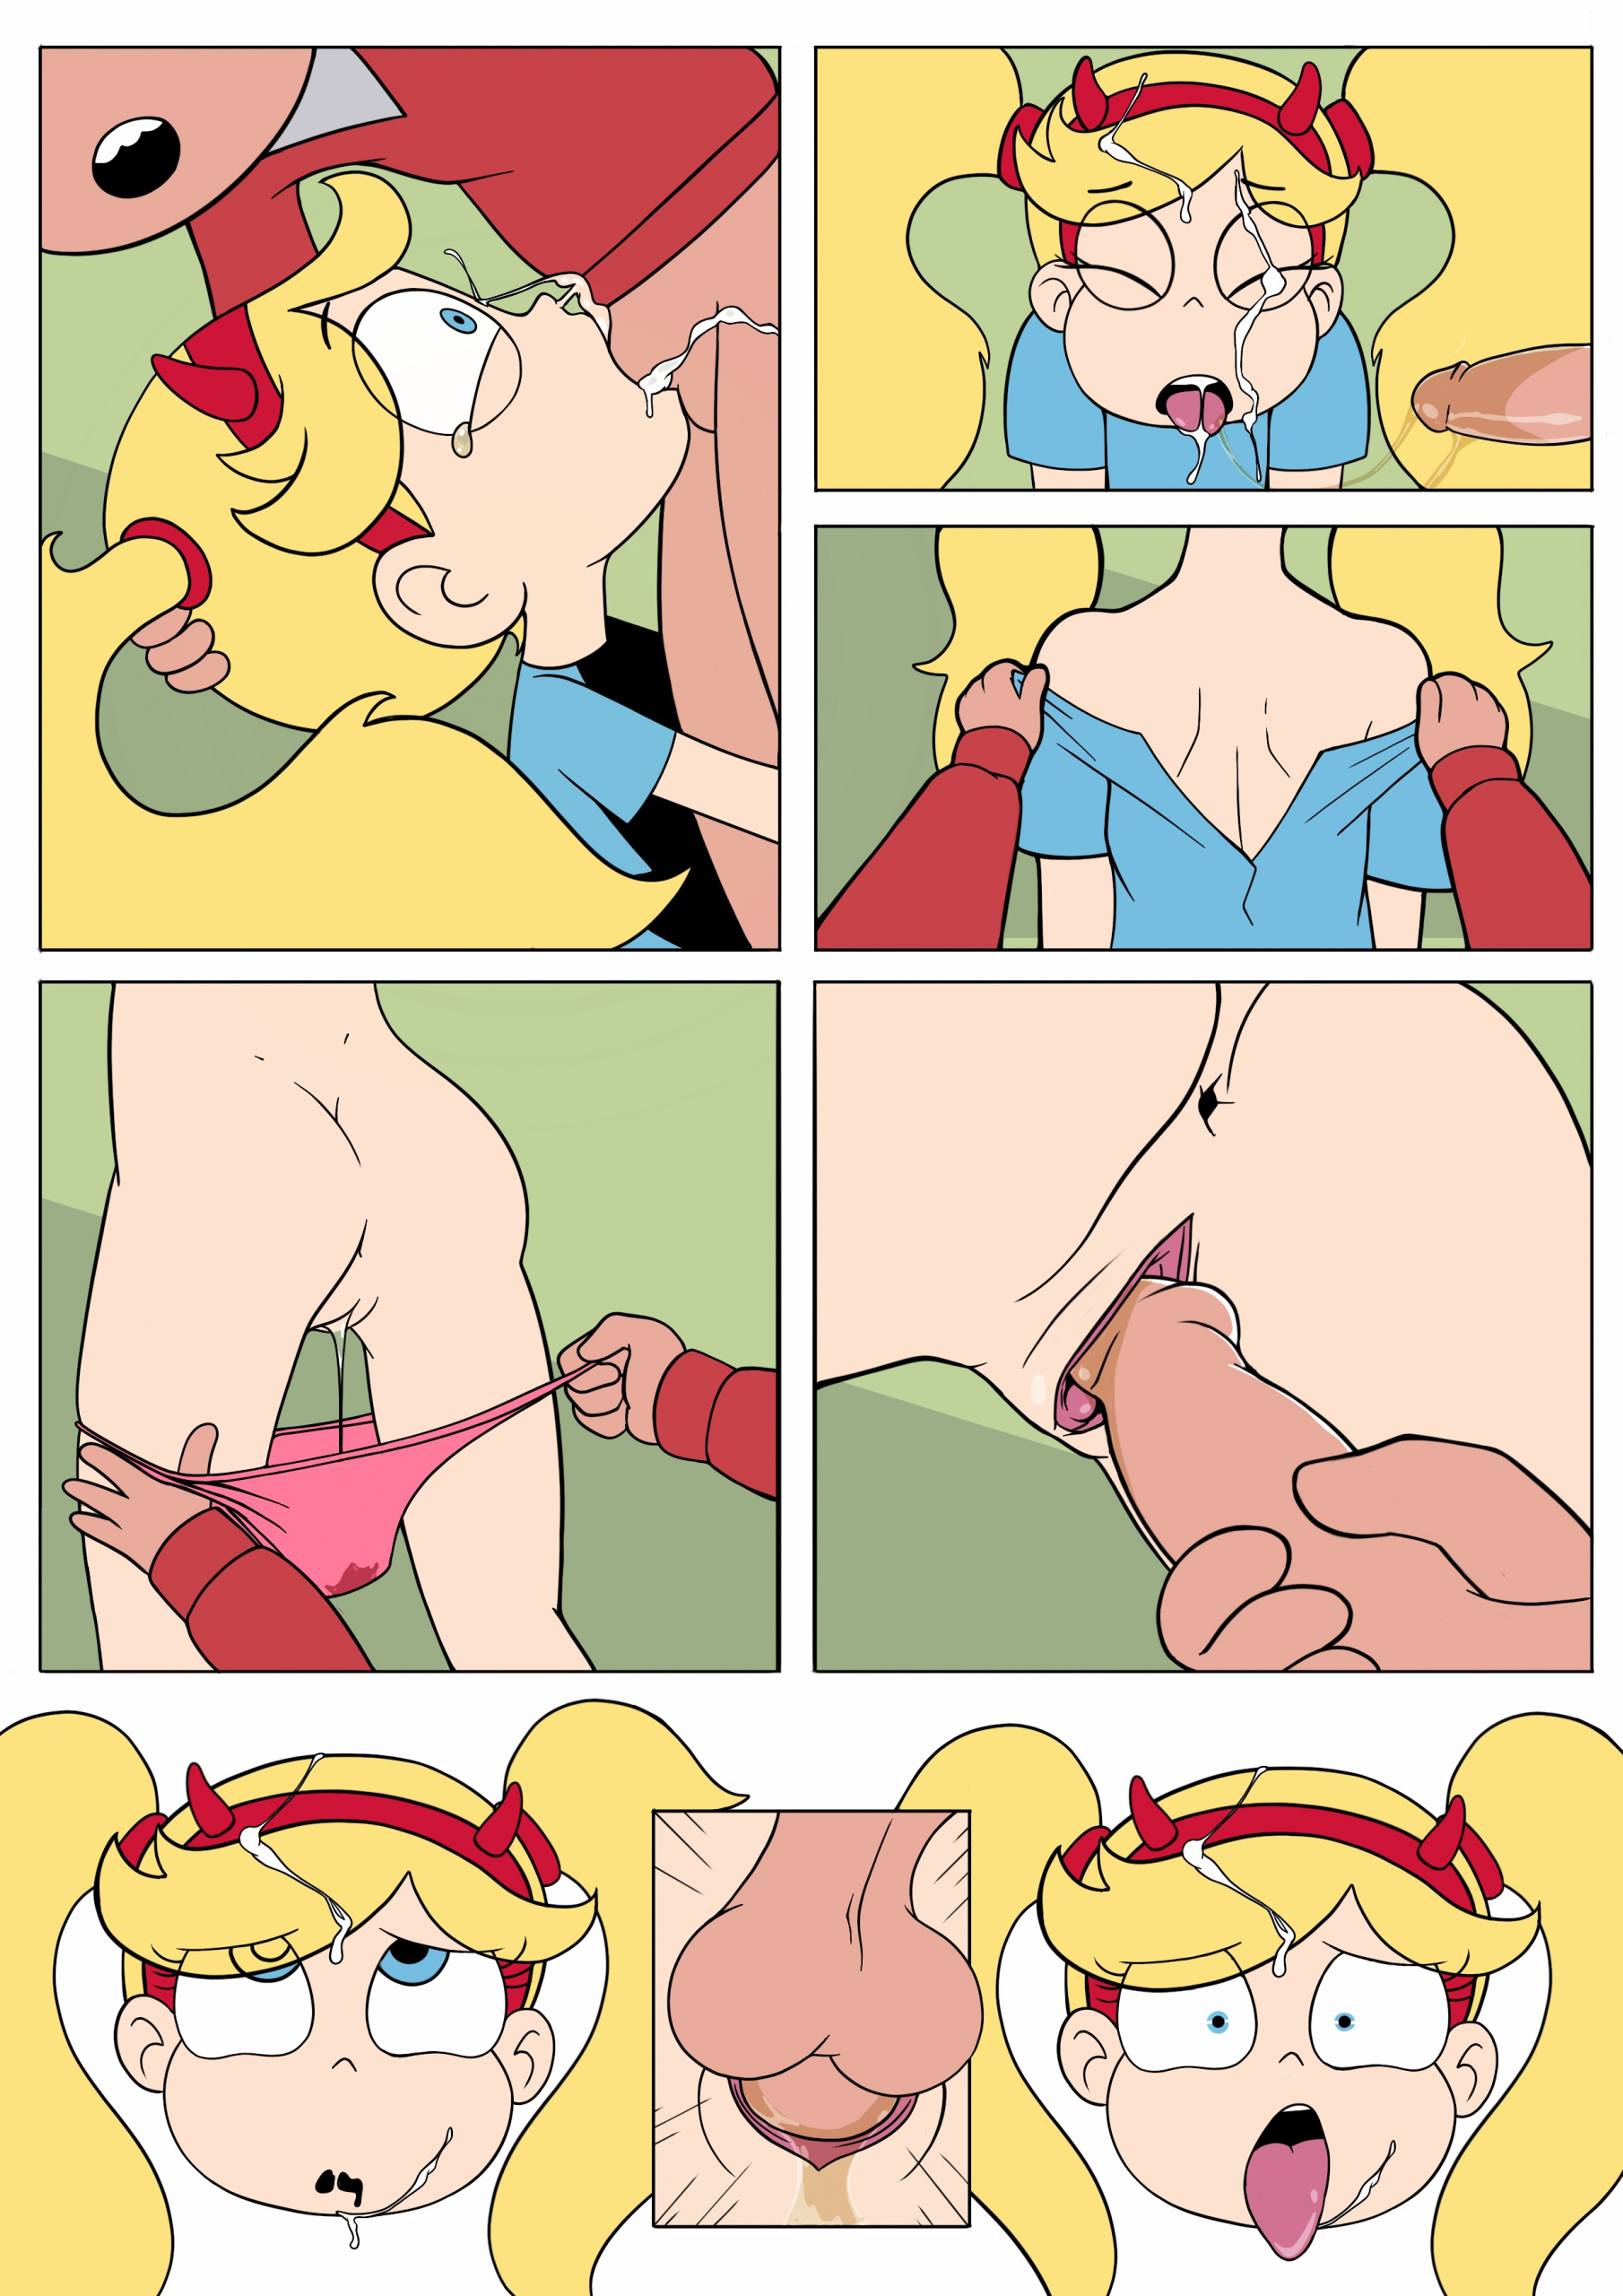 Star Vs the Forces of Evil - Dude-Doodle-Do porn comics Oral sex, Lolicon, Straight Shota